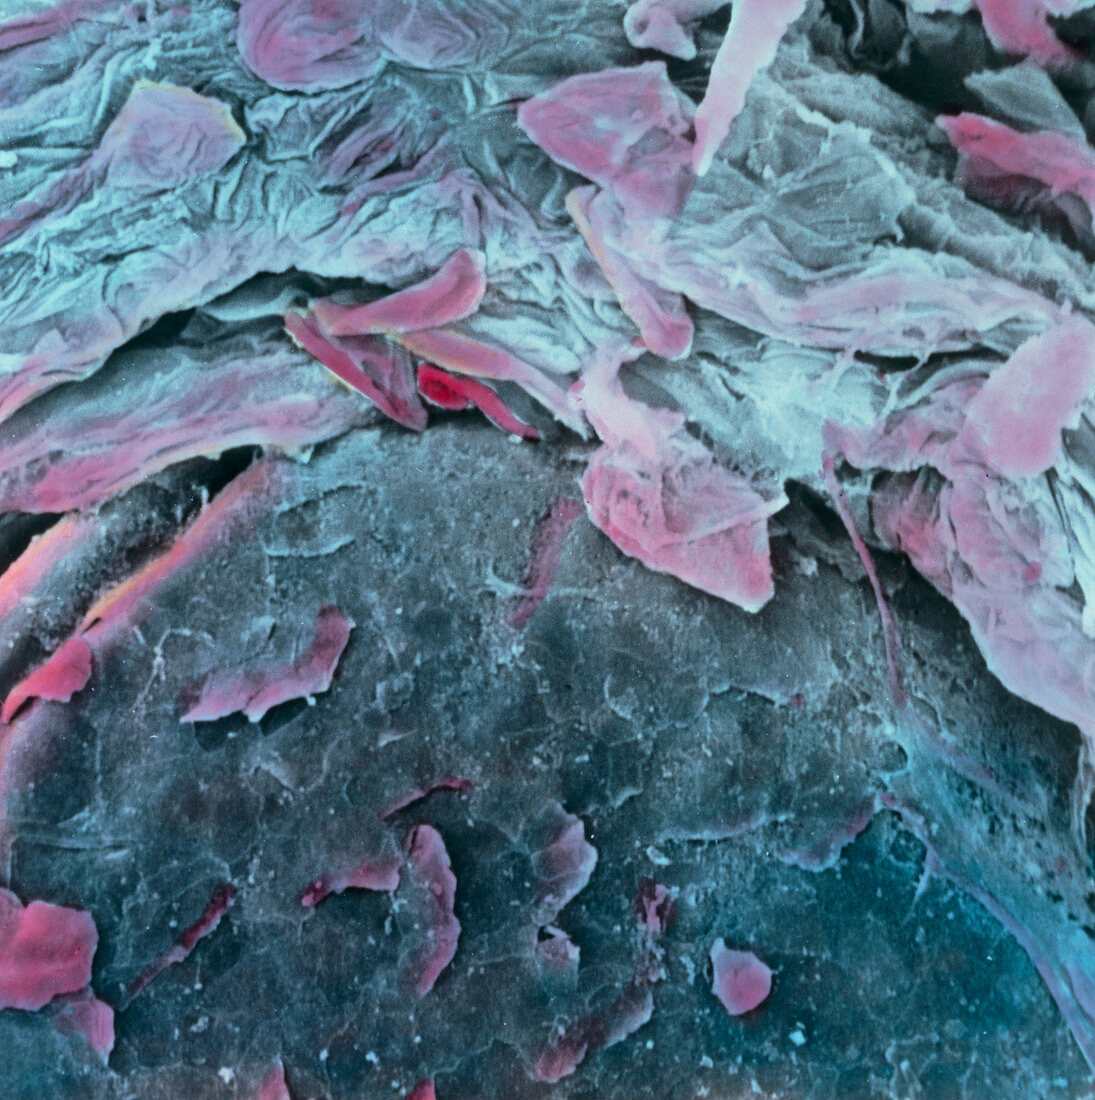 Coloured SEM of papillae on the tongue surface